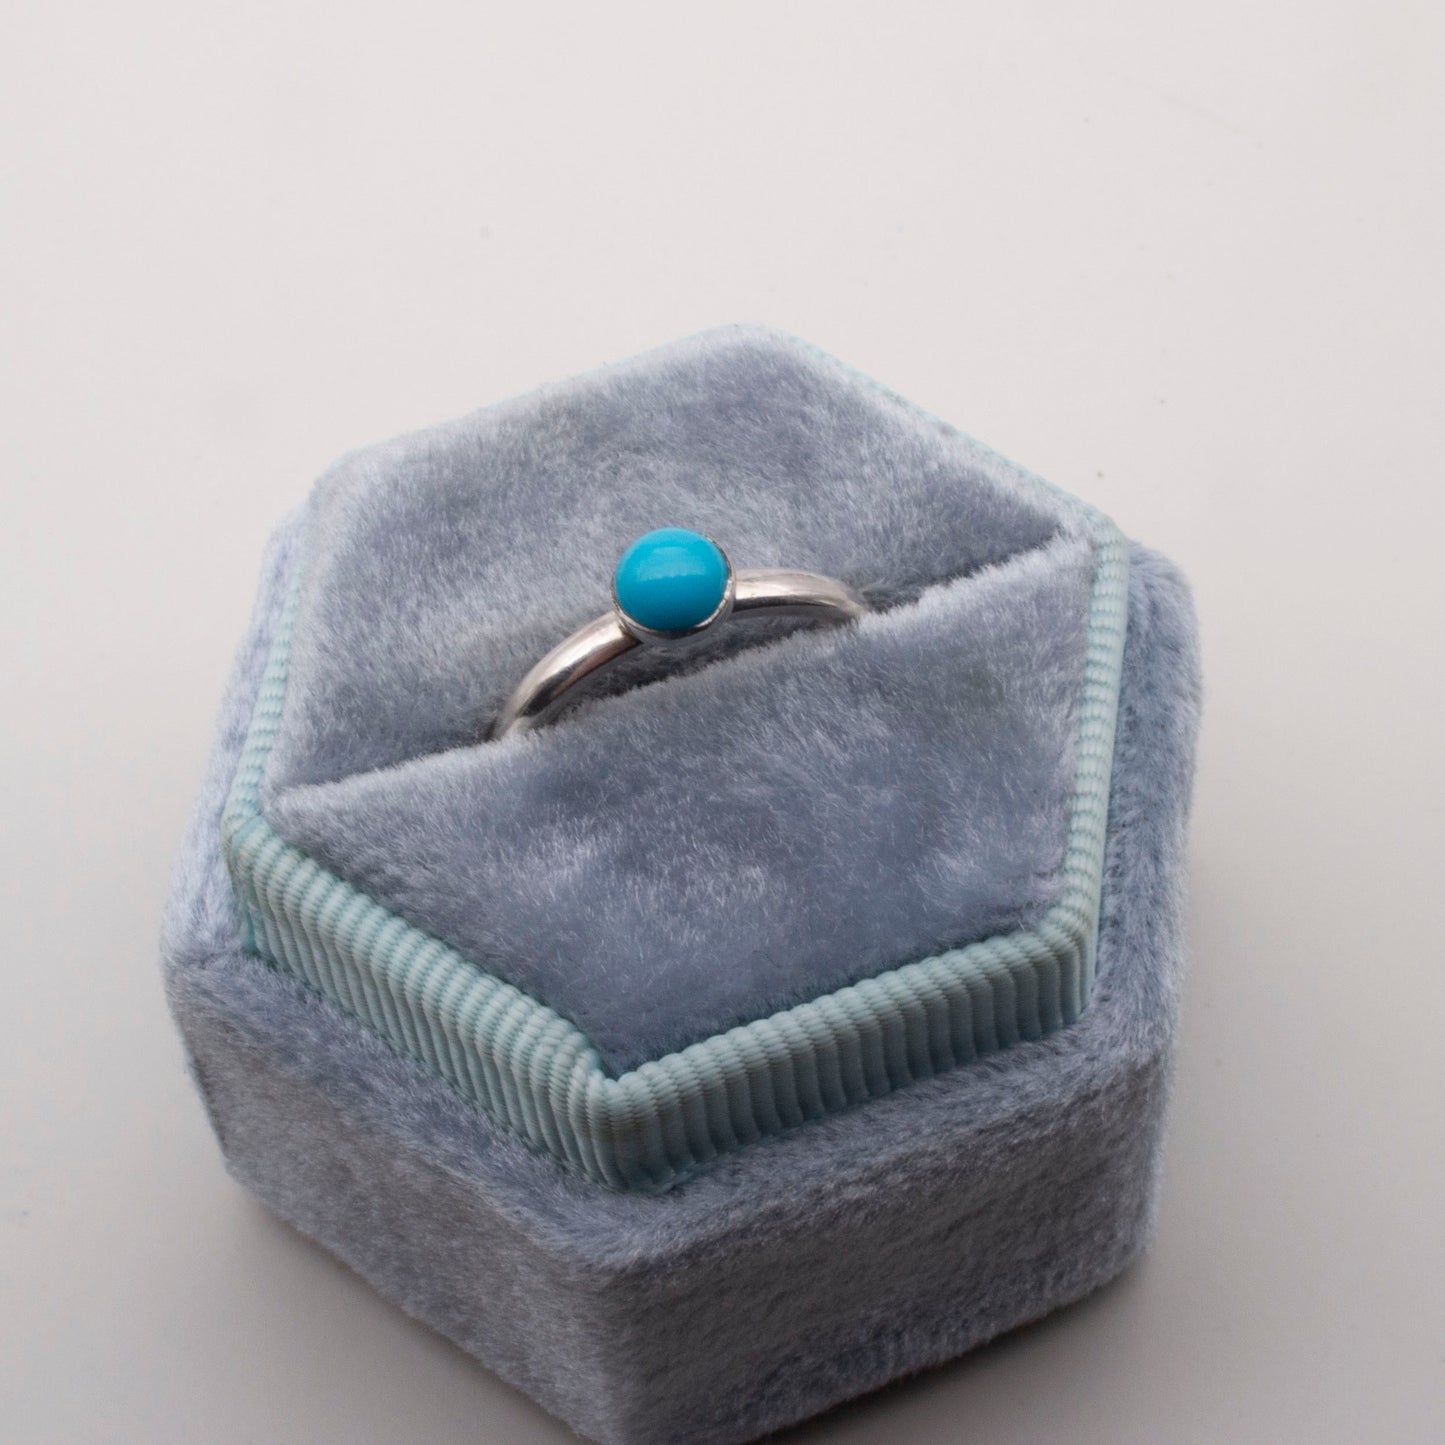 Turquoise cabochon ring  Size L